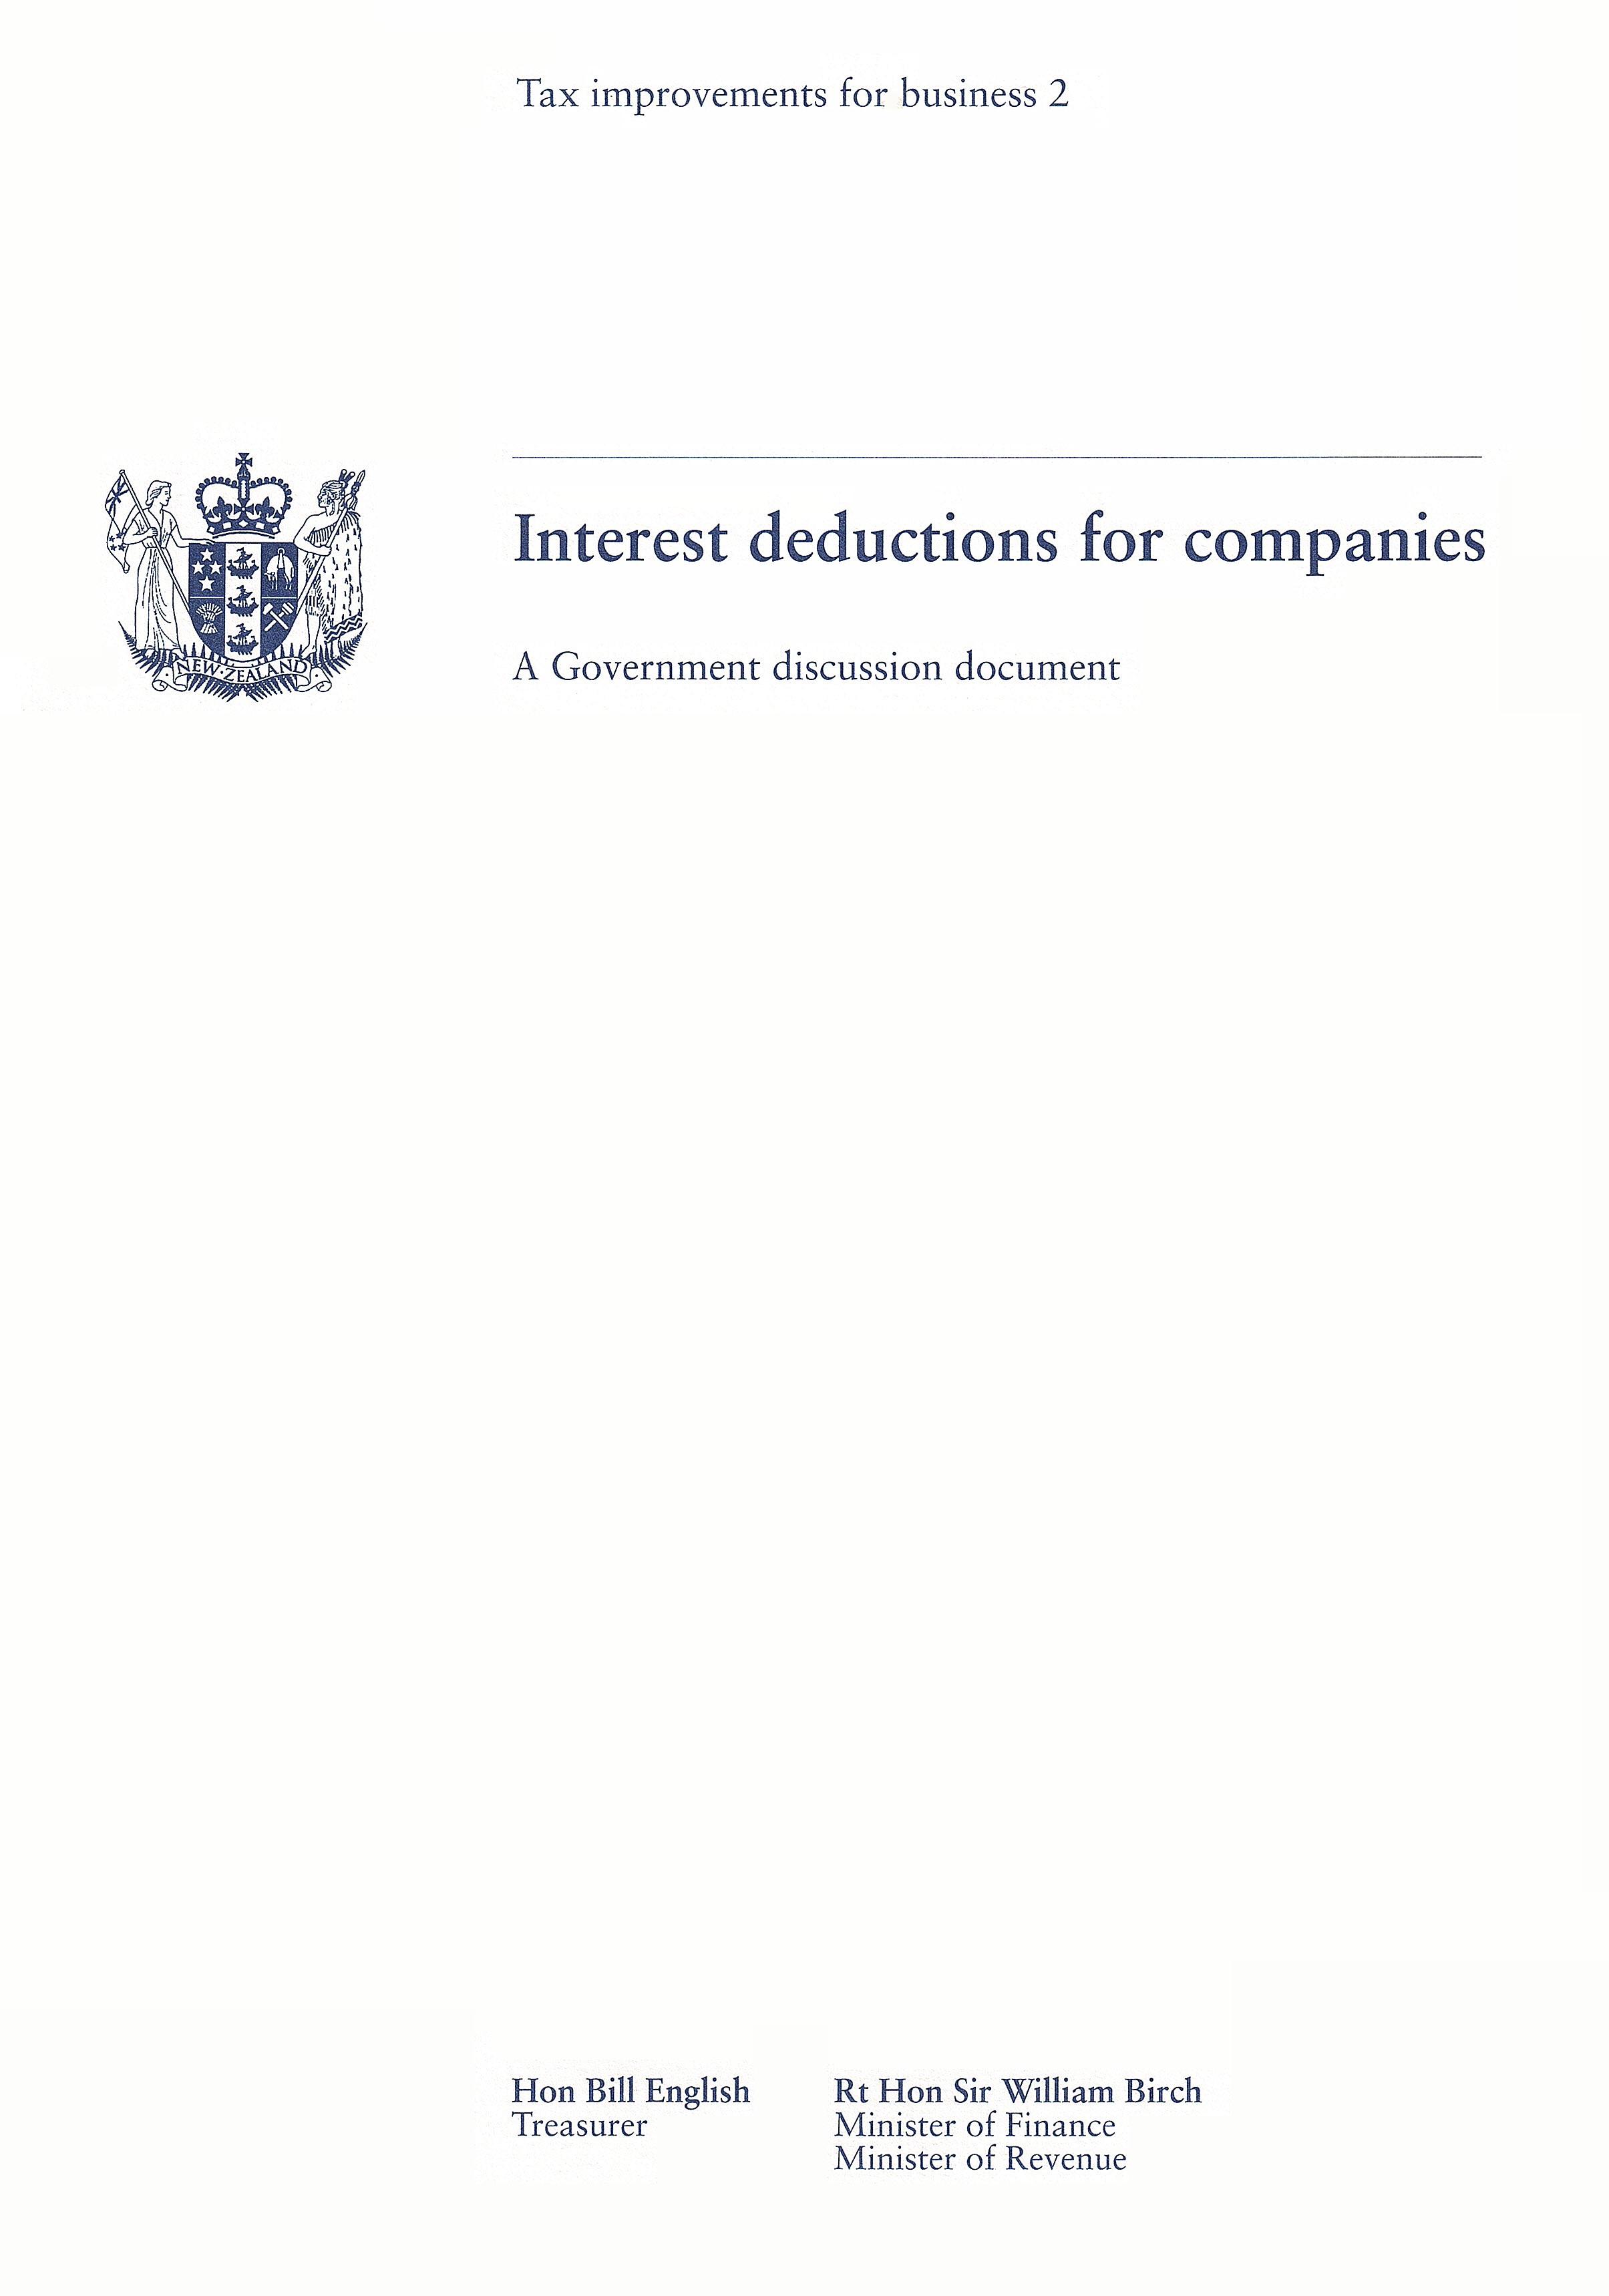 Publication cover image. Title = Interest deductions for companies - a Government discussion document. September 1999.